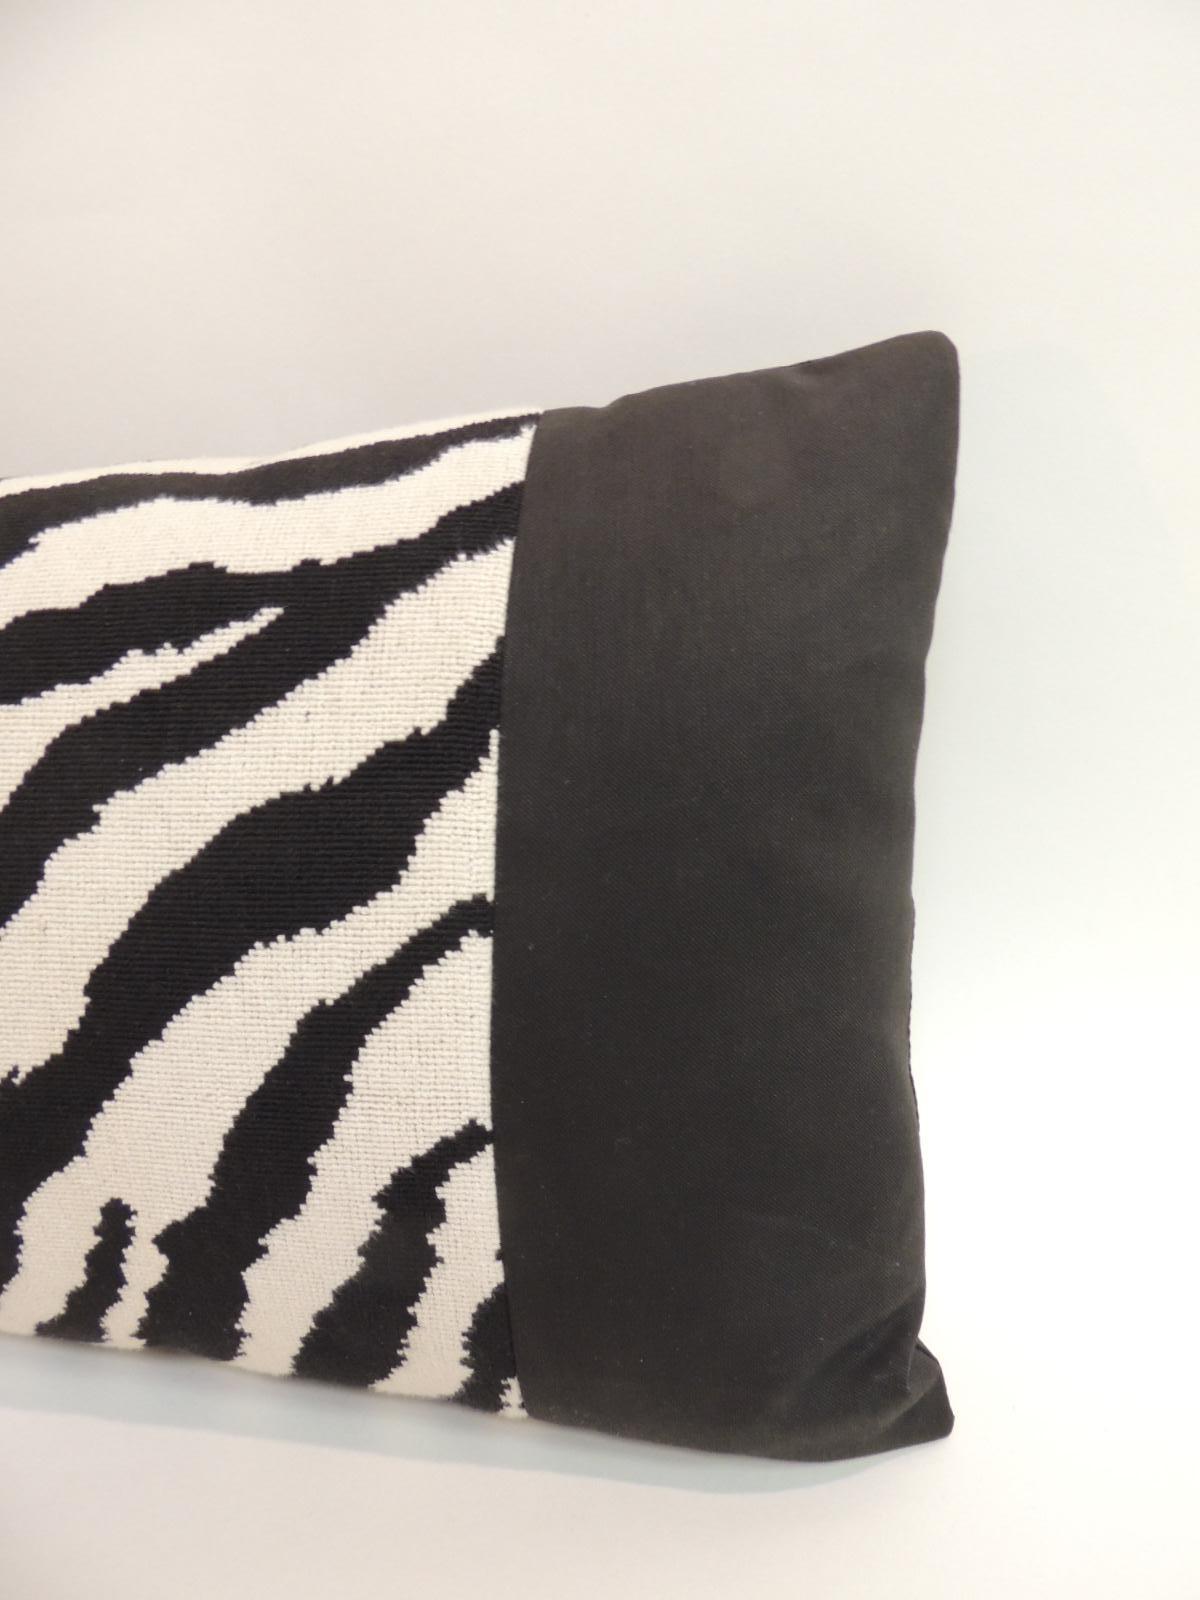 Large vintage black and white zebra pattern long decorative bolster pillow with black cotton frame and backing.
Handcrafted and designed in the USA with handstitched closure (no zipper.) with a custom made pillow insert.
Vintage Clarence House